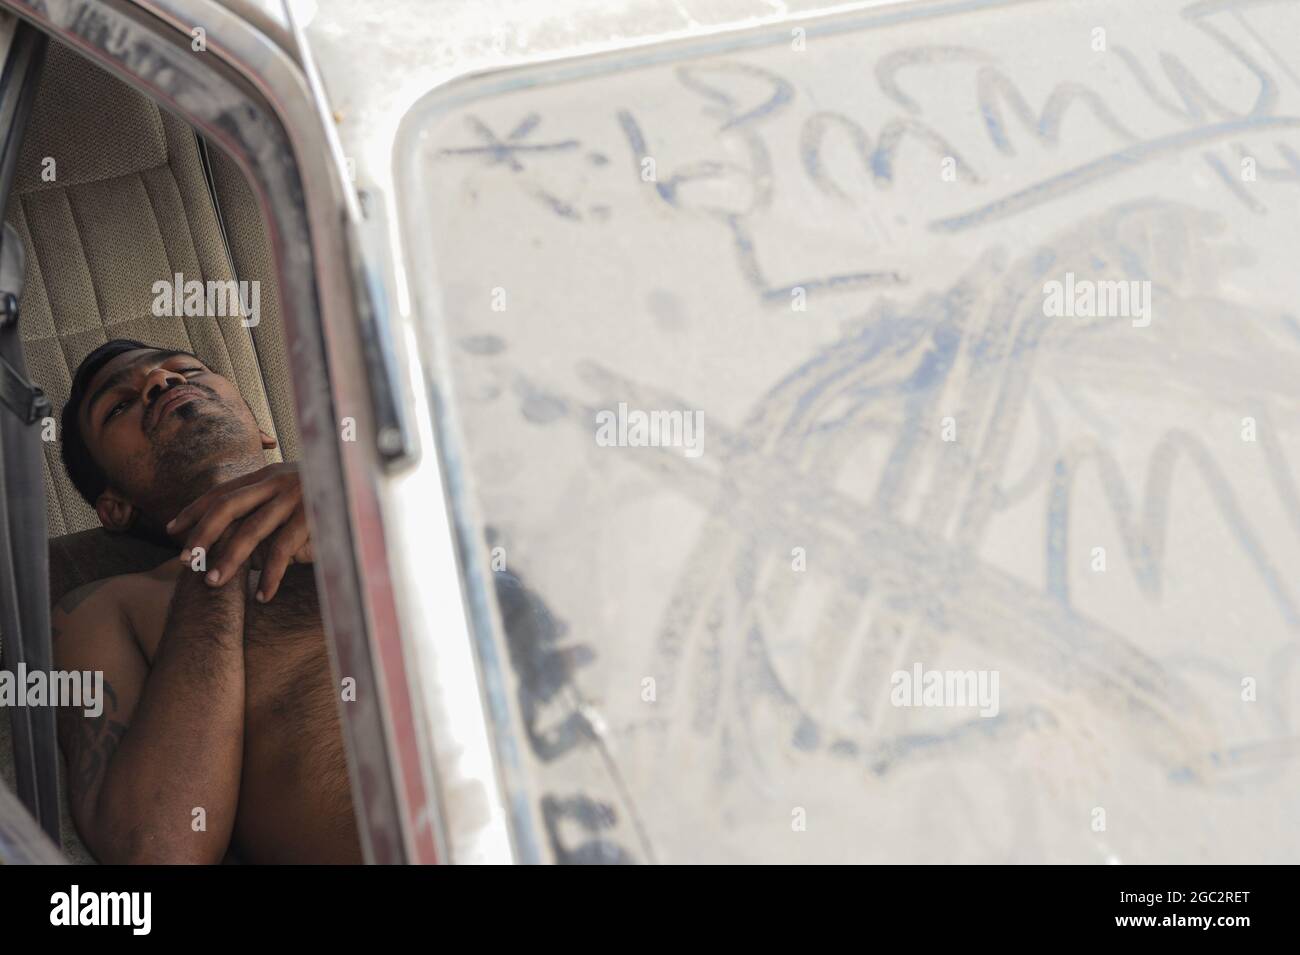 16.02.2014, Yangon, Myanmar, Asia - A man snoozes in the front seat of a parked automobile with its dirty windscreen completely covered in street dust. Stock Photo